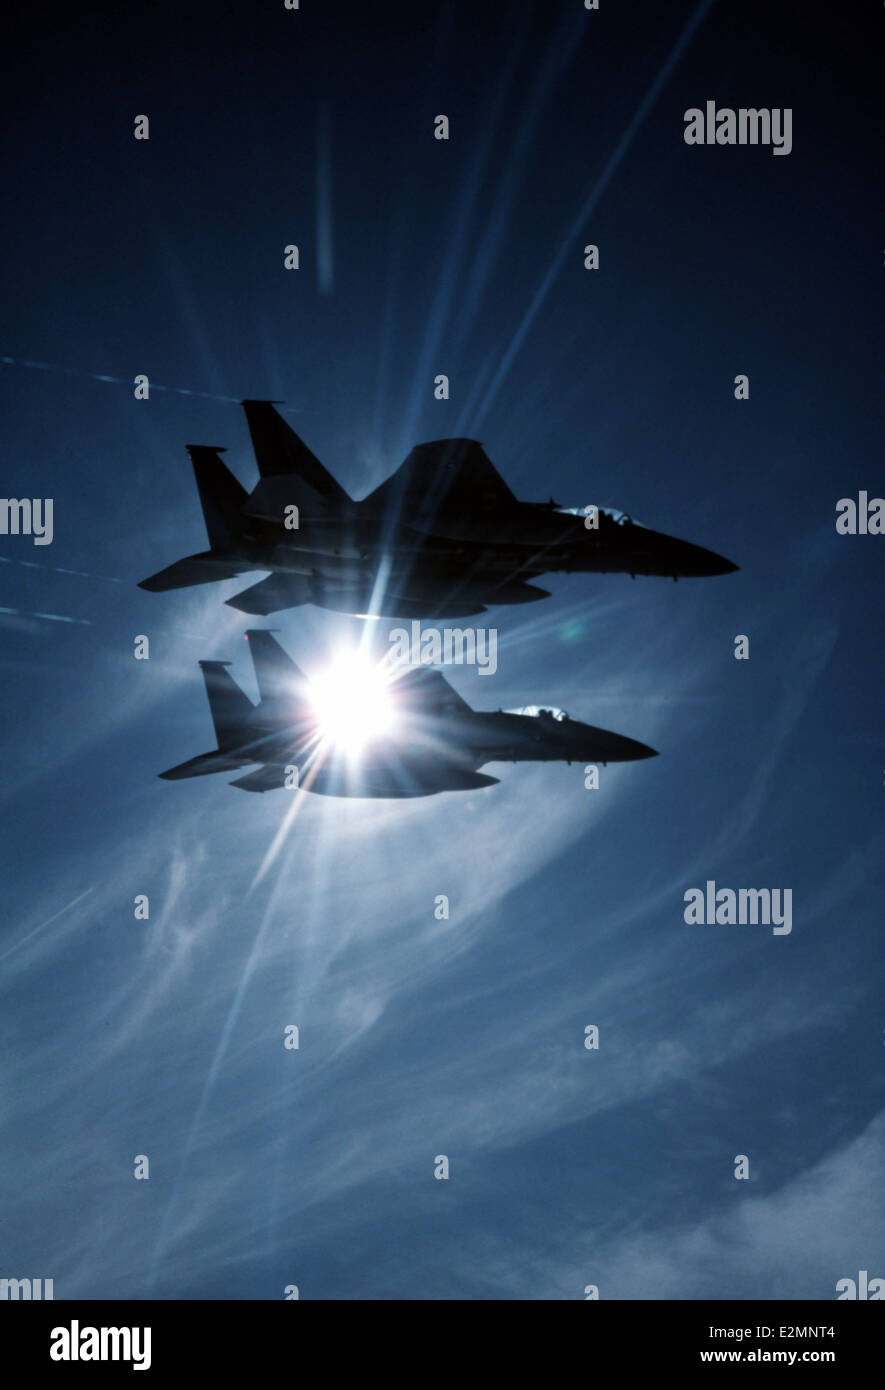 F-15 Eagle fighter aircraft Stock Photo